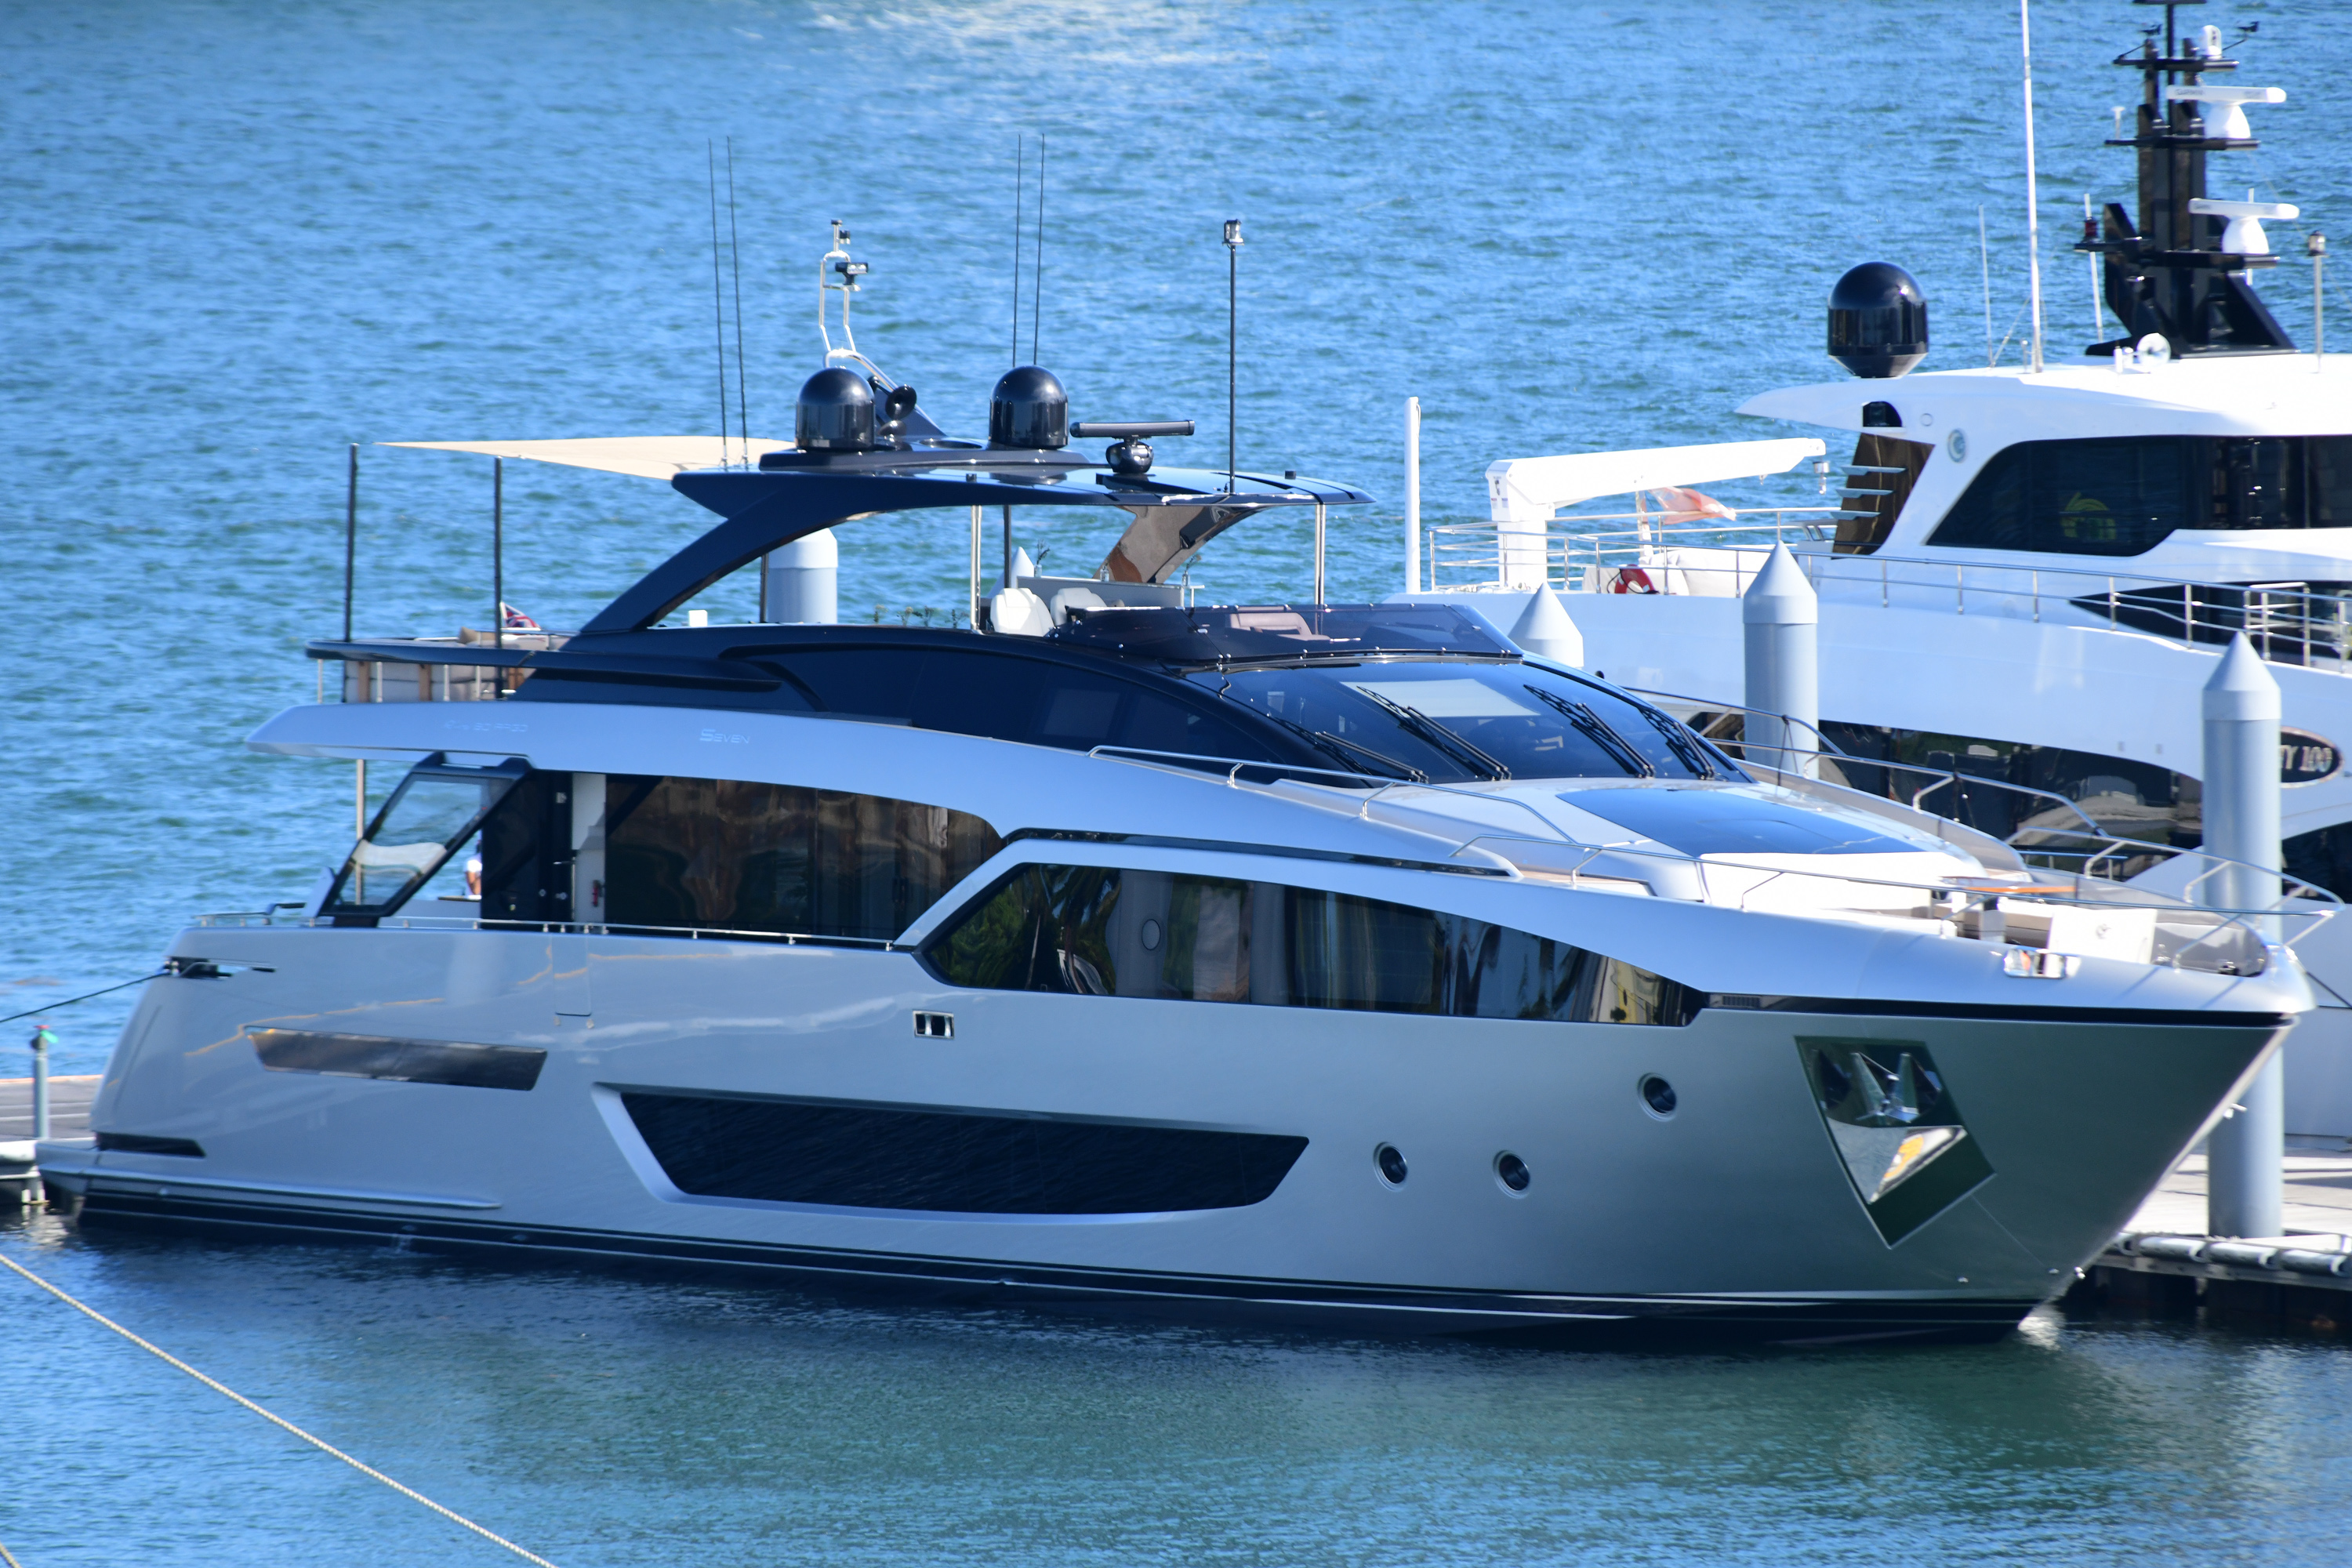 The yacht has been aptly named Seven, after the former England player's shirt number